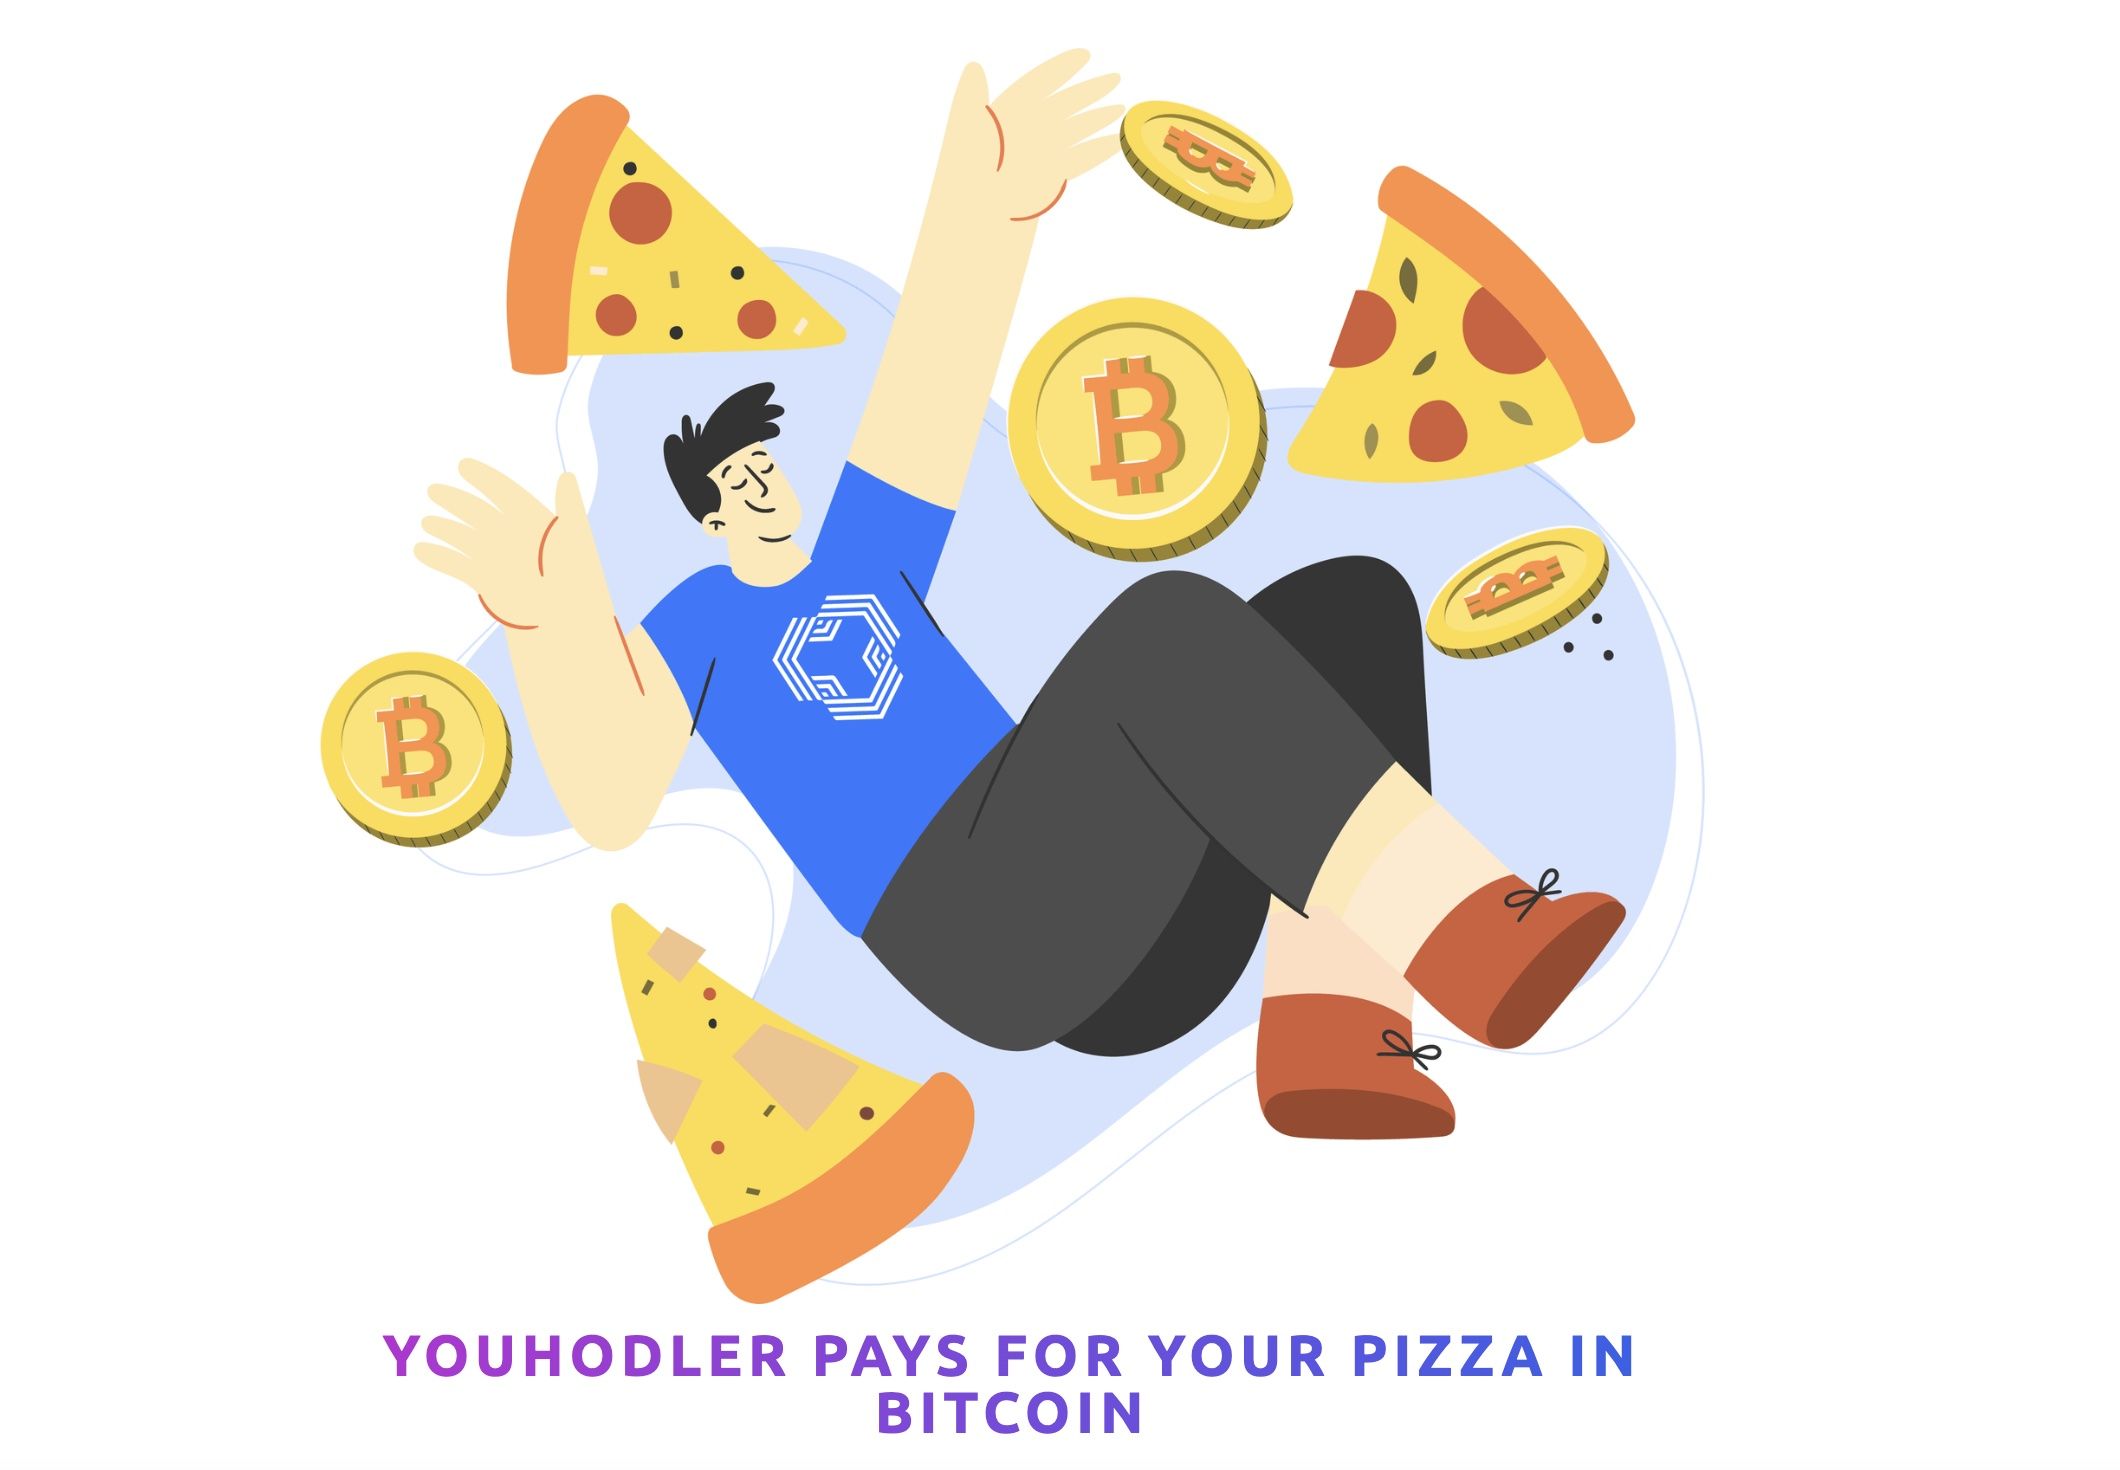 Free Pizza from YouHodler